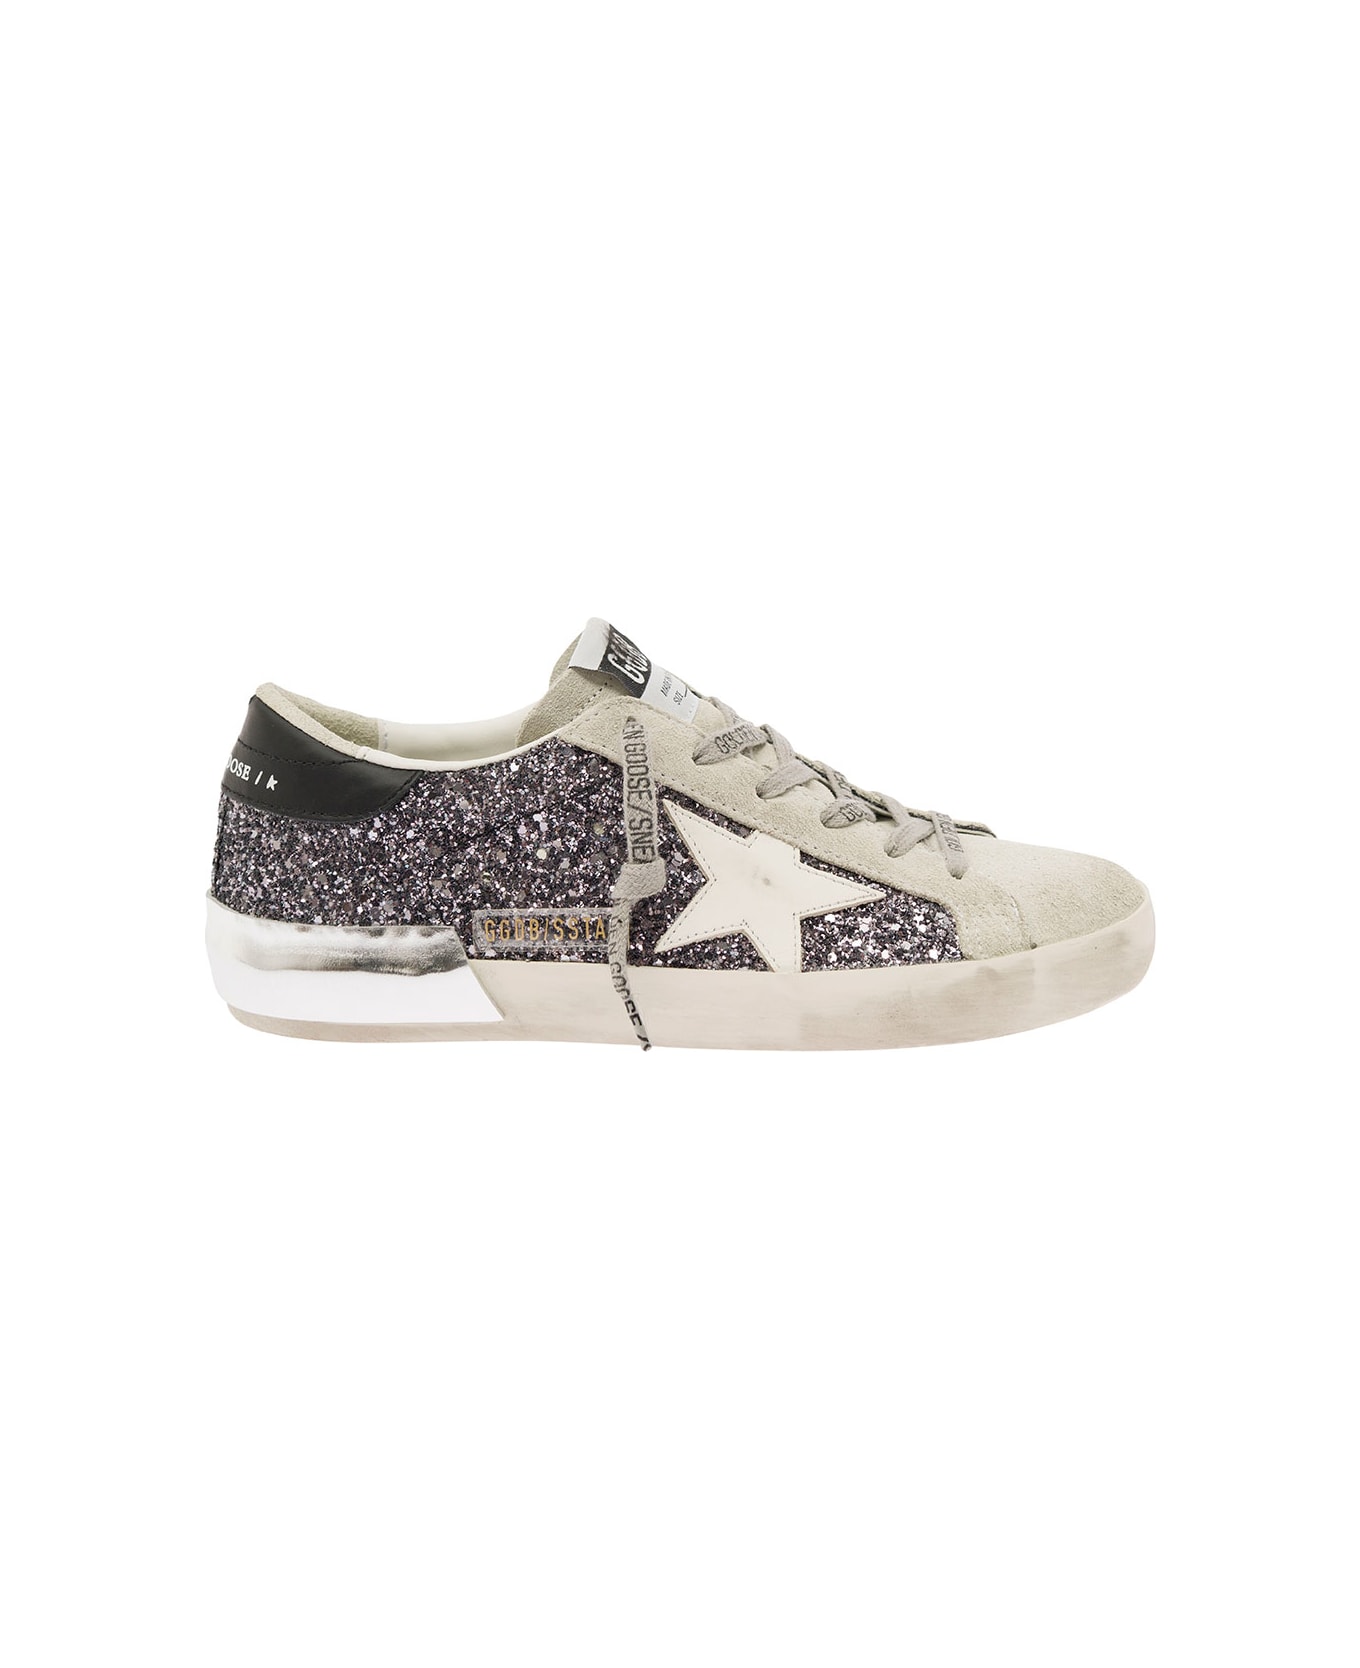 Golden Goose 'superstar' White Low Top Sneakers With Glitters In Vintage Looking Leather Woman - Grey スニーカー